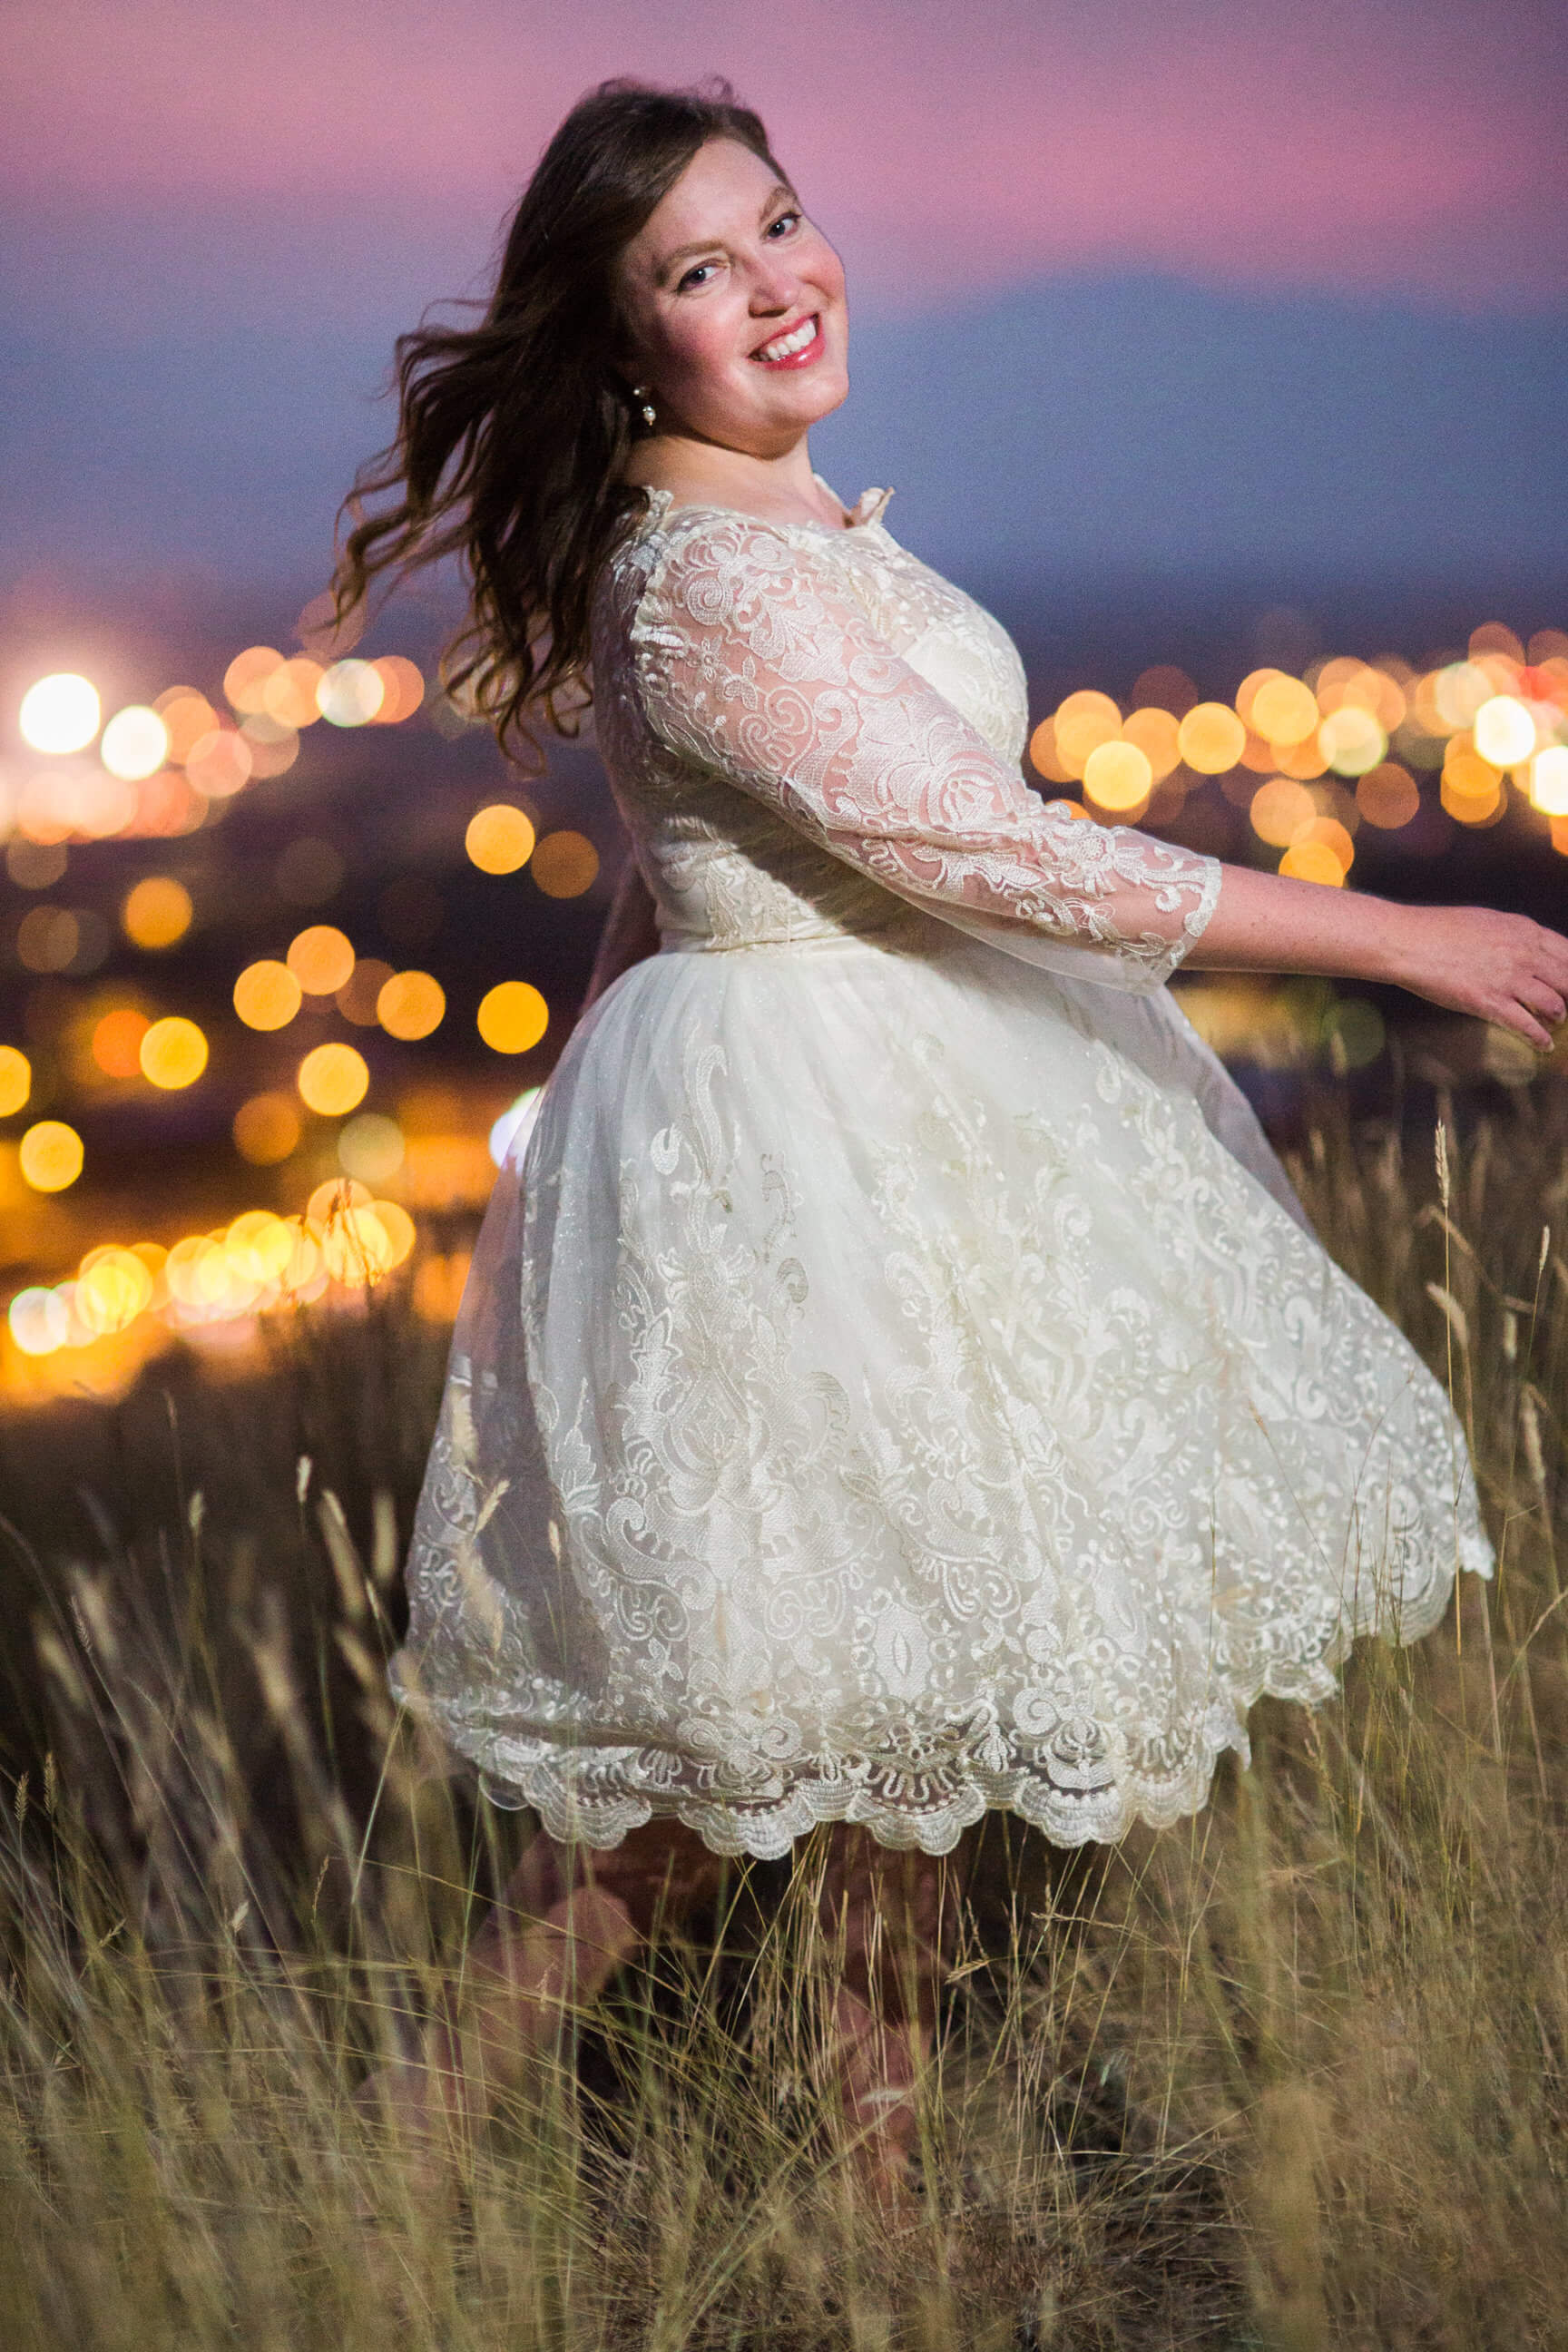 A new bride spins in her dress on a hillside overlooking downtown Missoula at night during her rock the dress photos in Missoula Montana